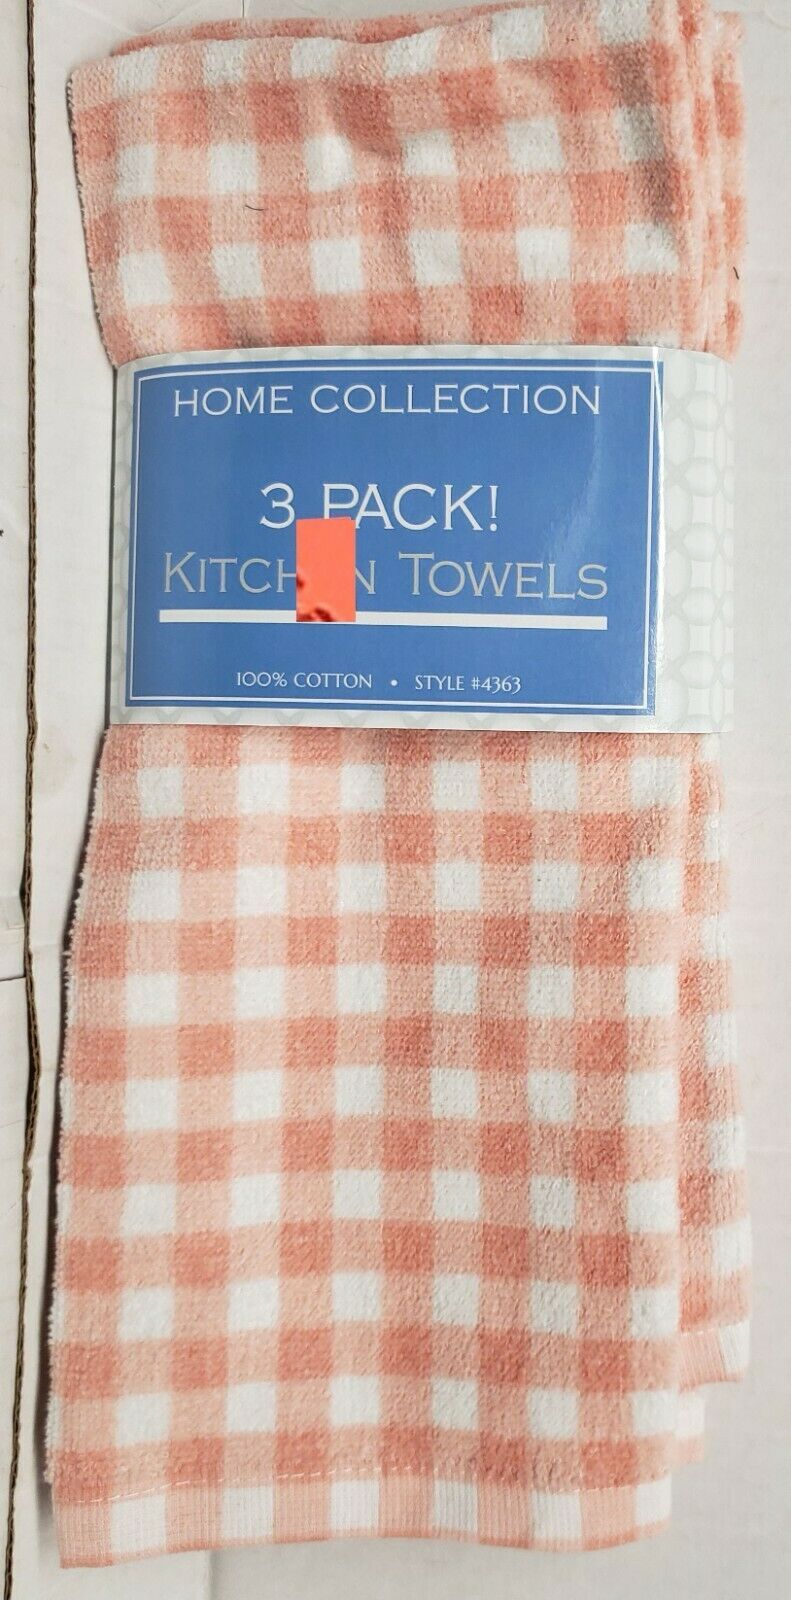 Set of 3 SAME PRINTED COTTON KITCHEN TOWELS 15" x 25" 3 APPLES by Broder 